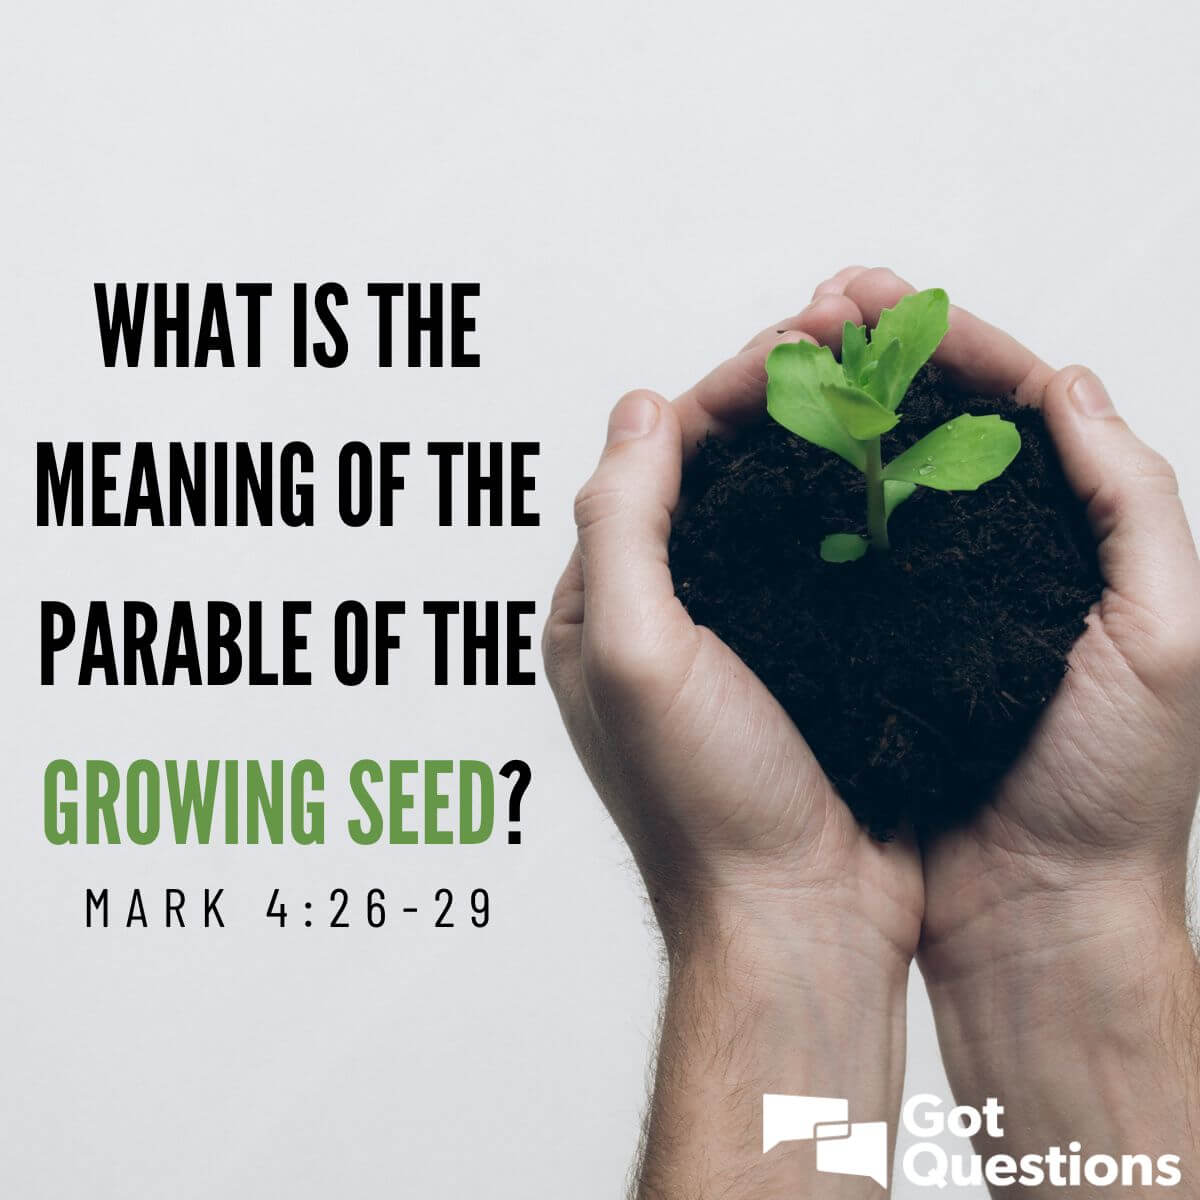 What is the meaning of the Parable of the Growing Seed (Mark 4:26-29